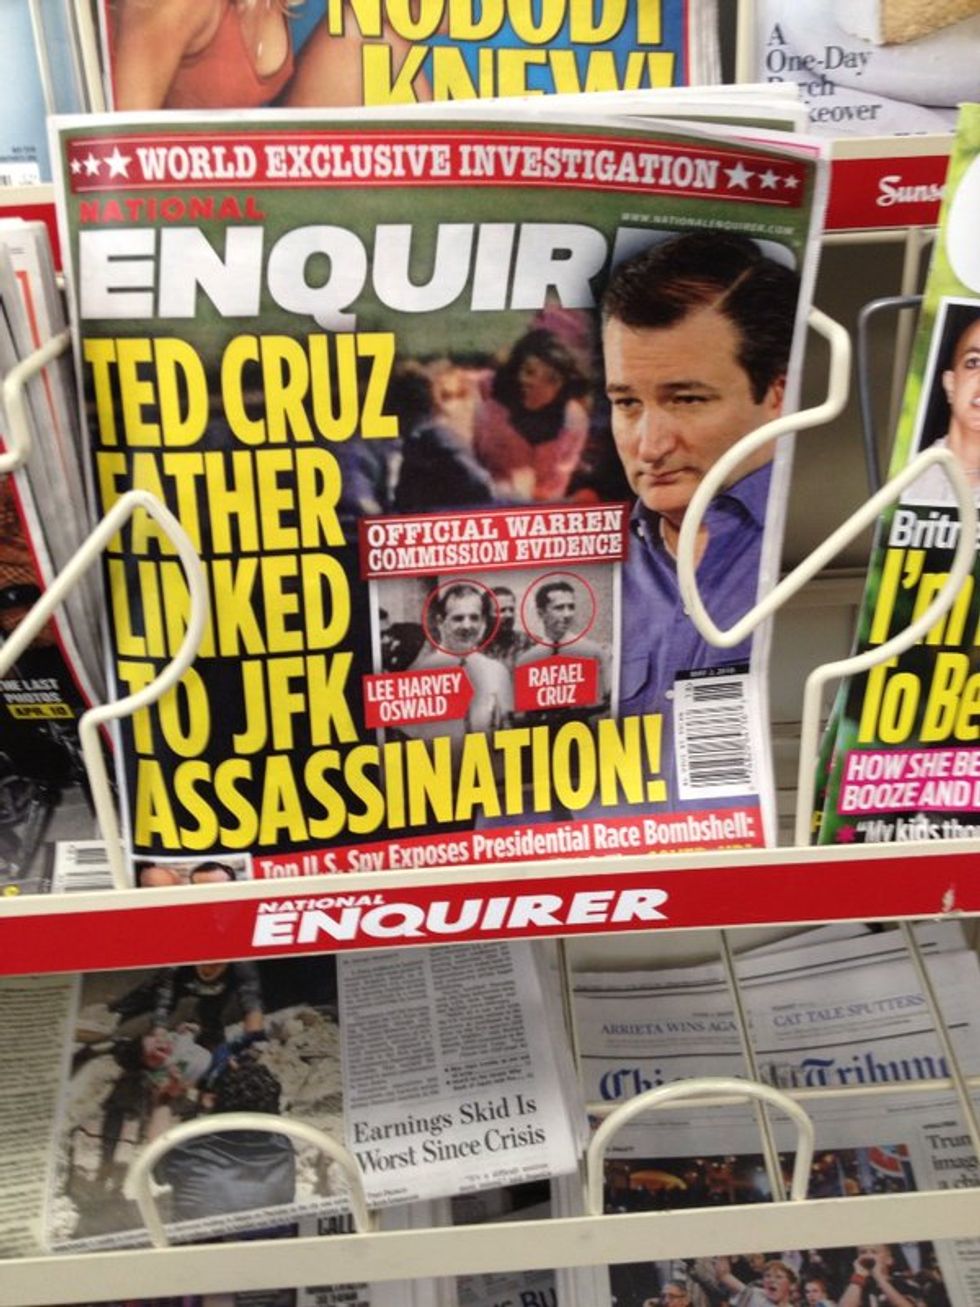 Donald Trump Doesn't Know If Ted Cruz's Dry Drunk Dad Murdered JFK, But MAYBE!